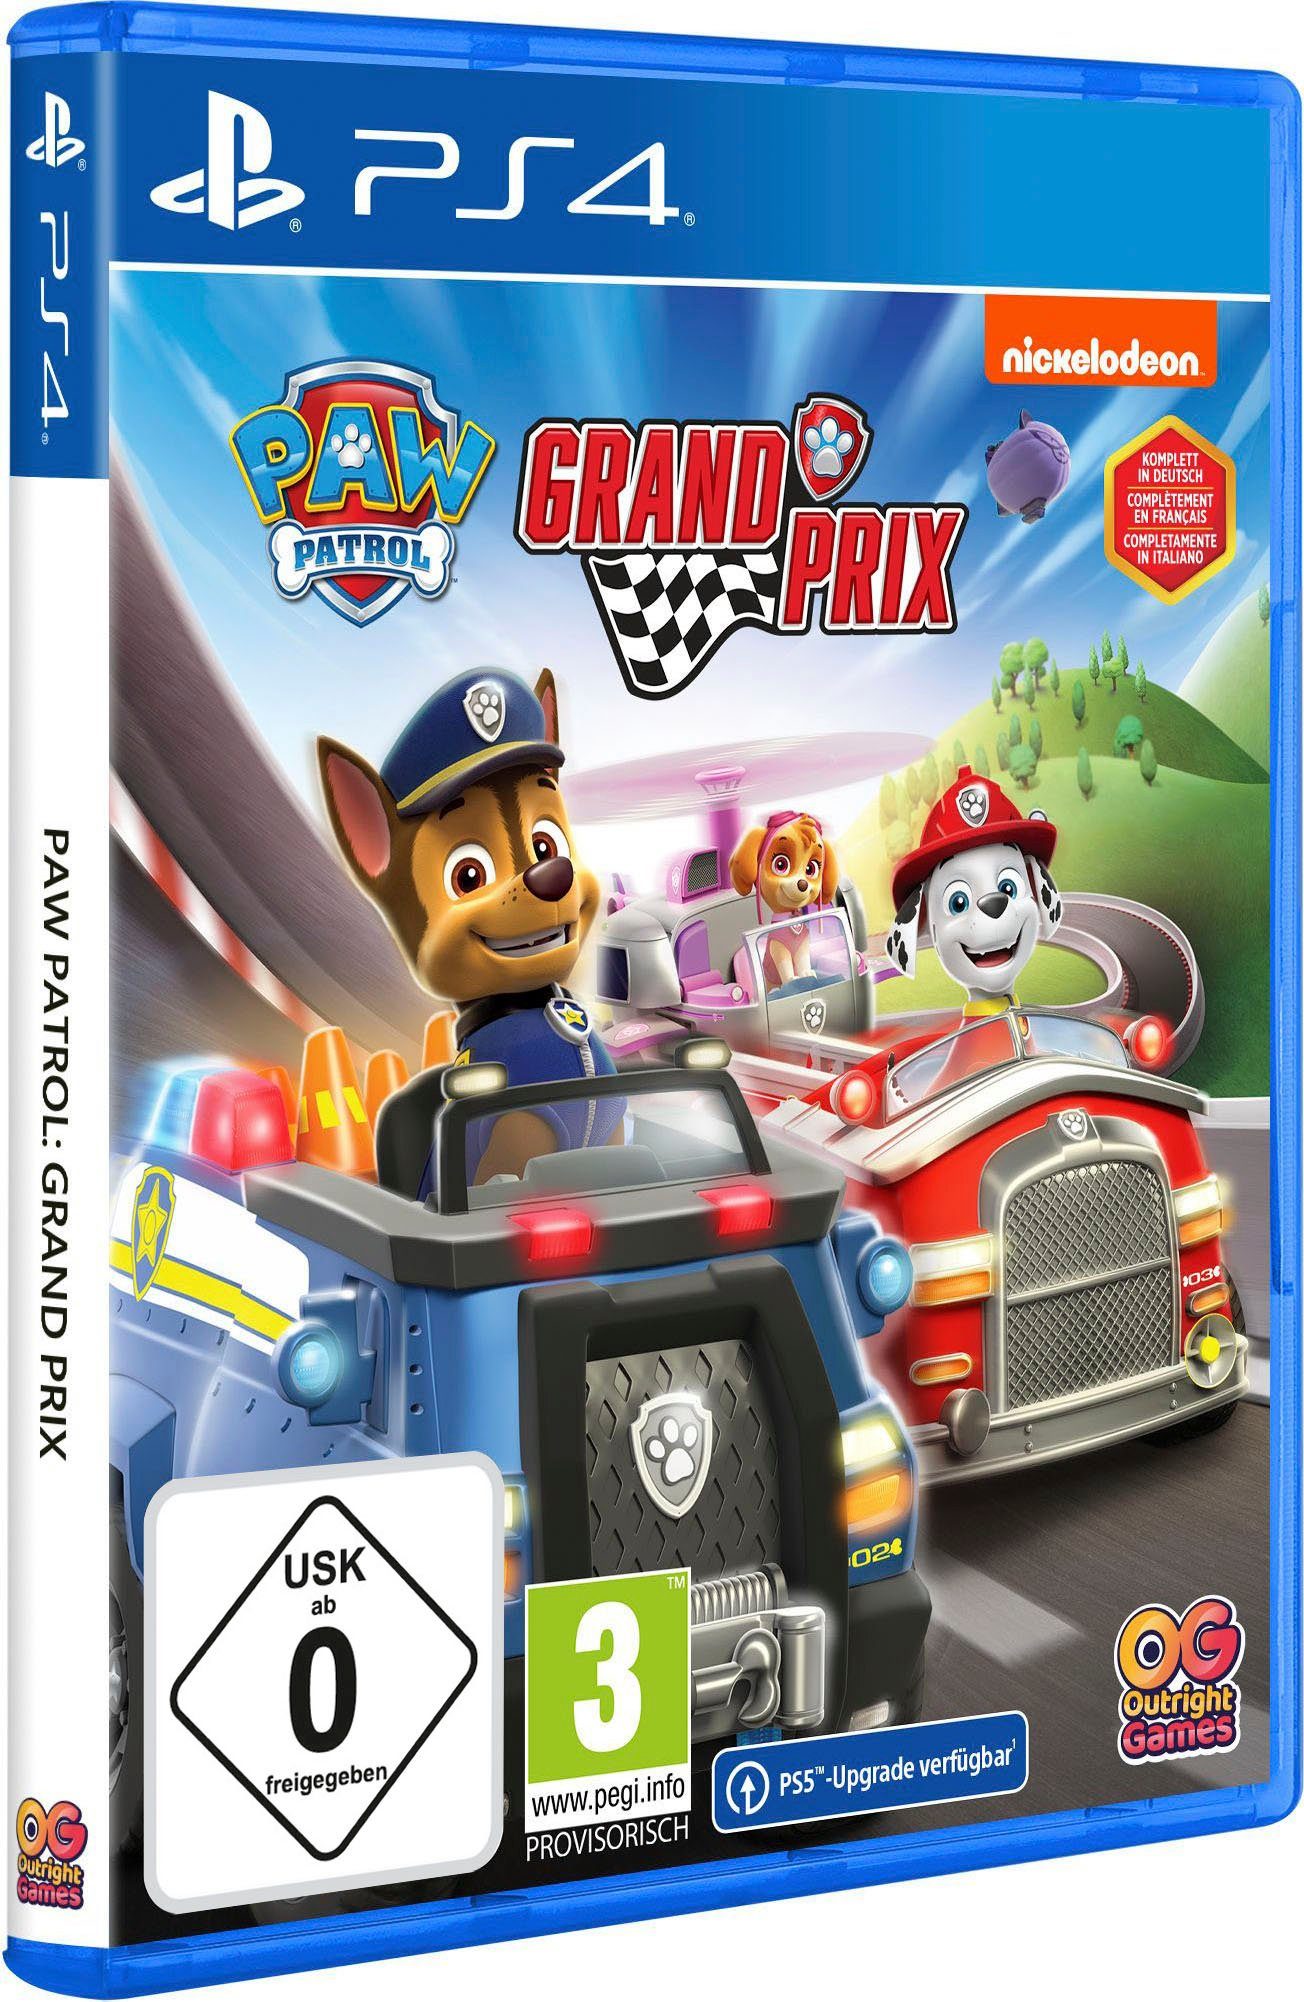 Games Patrol: Outright Paw Prix 4 PlayStation Grand